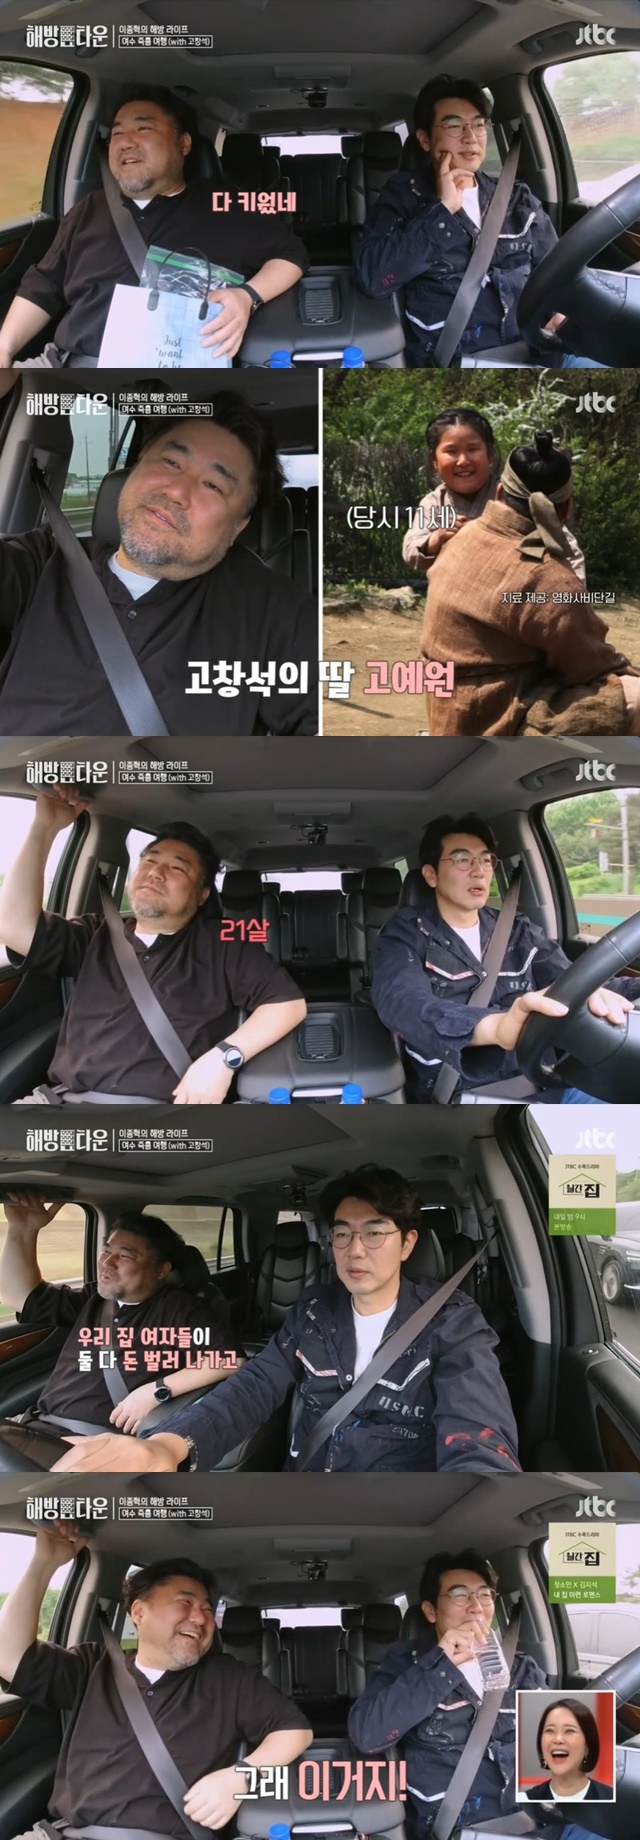 Lee Jong-hyeok said the first son turbidity will go to college next year.Lee Jong-hyeok met Ko Chang-seok and went on a sudden Yeosu trip at JTBCs Feminist Movement Town, which was broadcast on June 22nd.Ko Chang-seok only came out to know that he was eating with Lee Jong-hyeok, but later found out that Yeosu was the destination and called his wife Lee Jung Eun and said, I do not think I can go home today.Lee Jung Eun was worried that he was drunk again? Im already drunk. Lee Jong-hyeok asked for his understanding that Chang Seok is going to spend some time with his brother.When Ko Chang-seok said, Ill go to Yeosu for a drink, Lee Jung Eun said, The fortune teller told you to watch your drink.Dont drink too much, he continued, expressing concern.Ko Chang-seok hung up and asked Lee Jong-hyeok, You are a good keeper, you have a little time to observe, and Lee Jong-hyeok said, I will go to college next year. Ko Chang-seok responded, I have grown it.